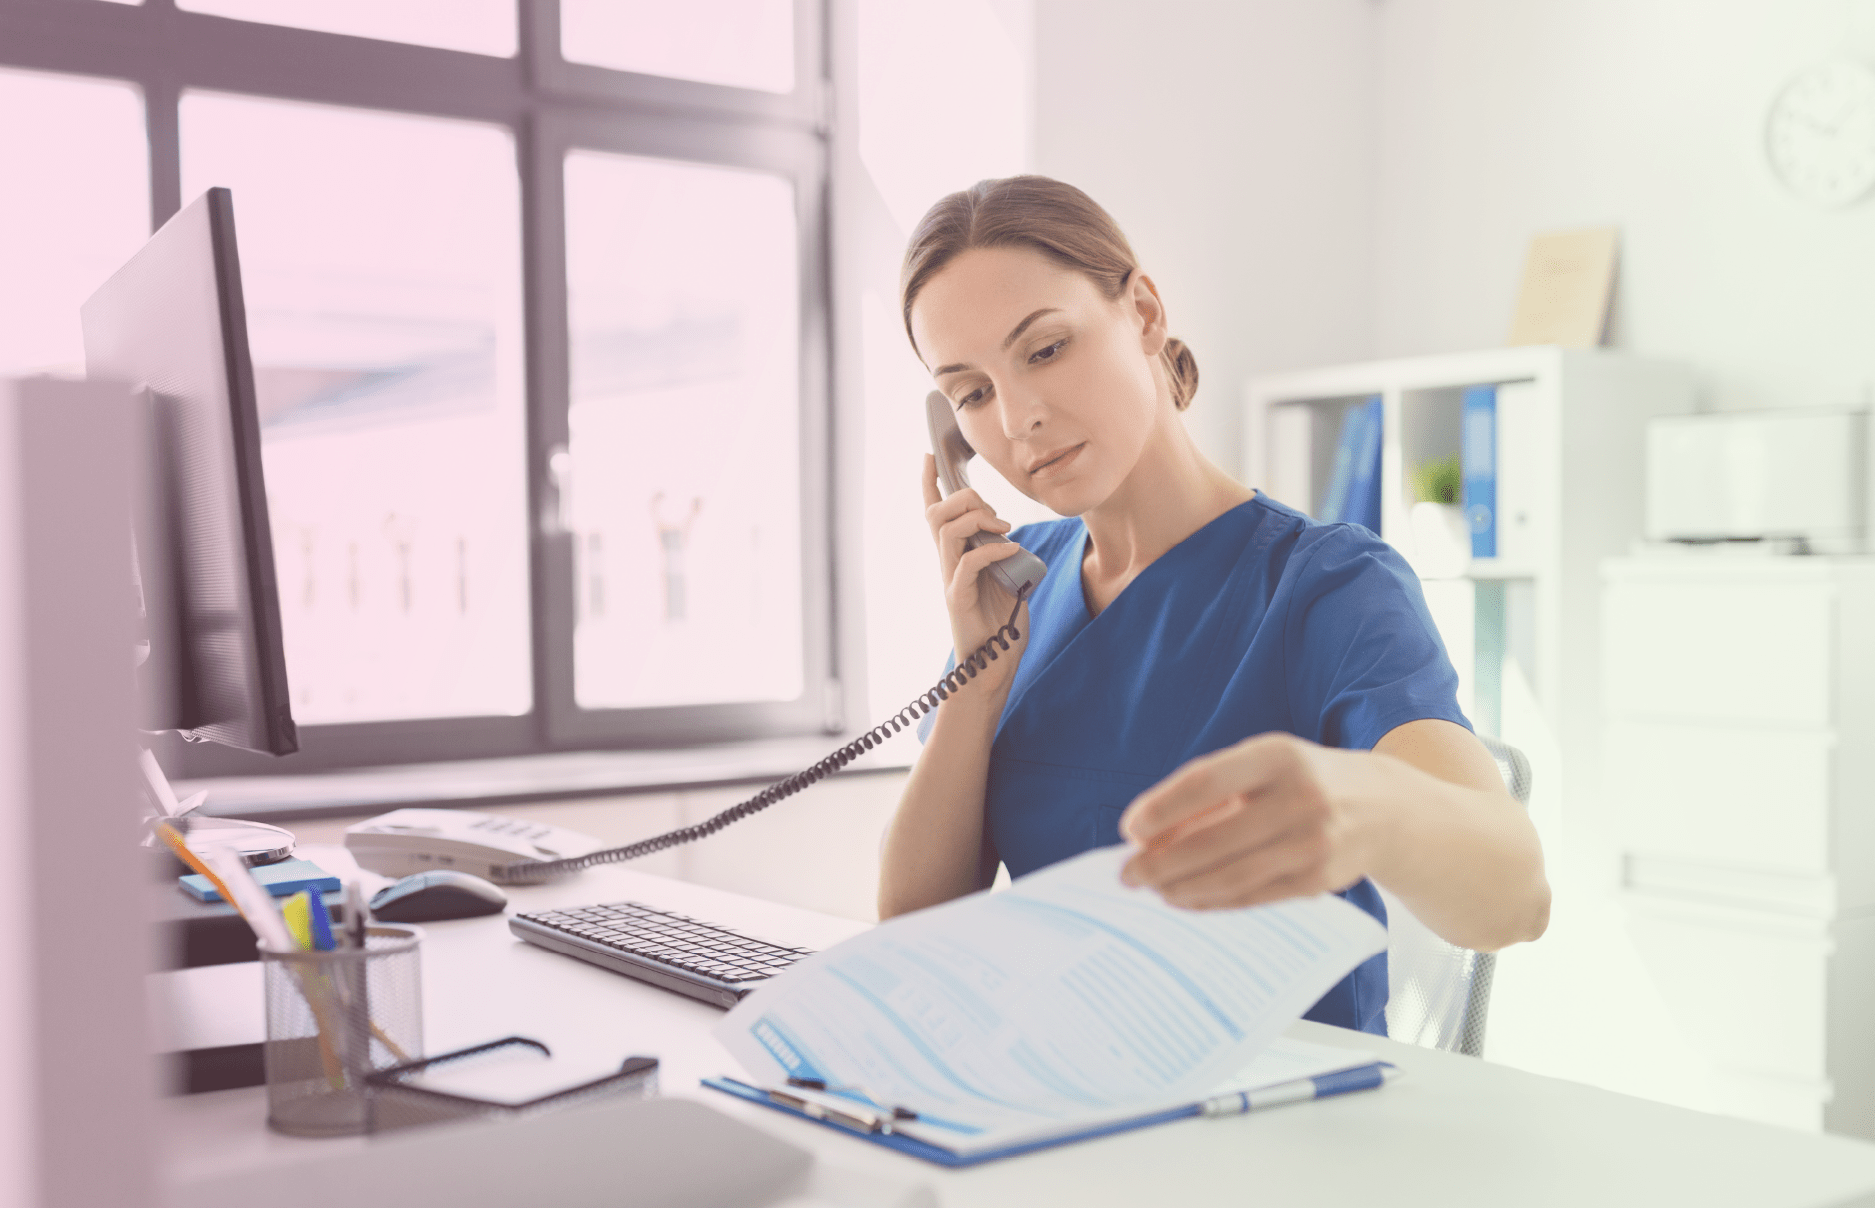 Nurse checking notes and paperwork while on the phone